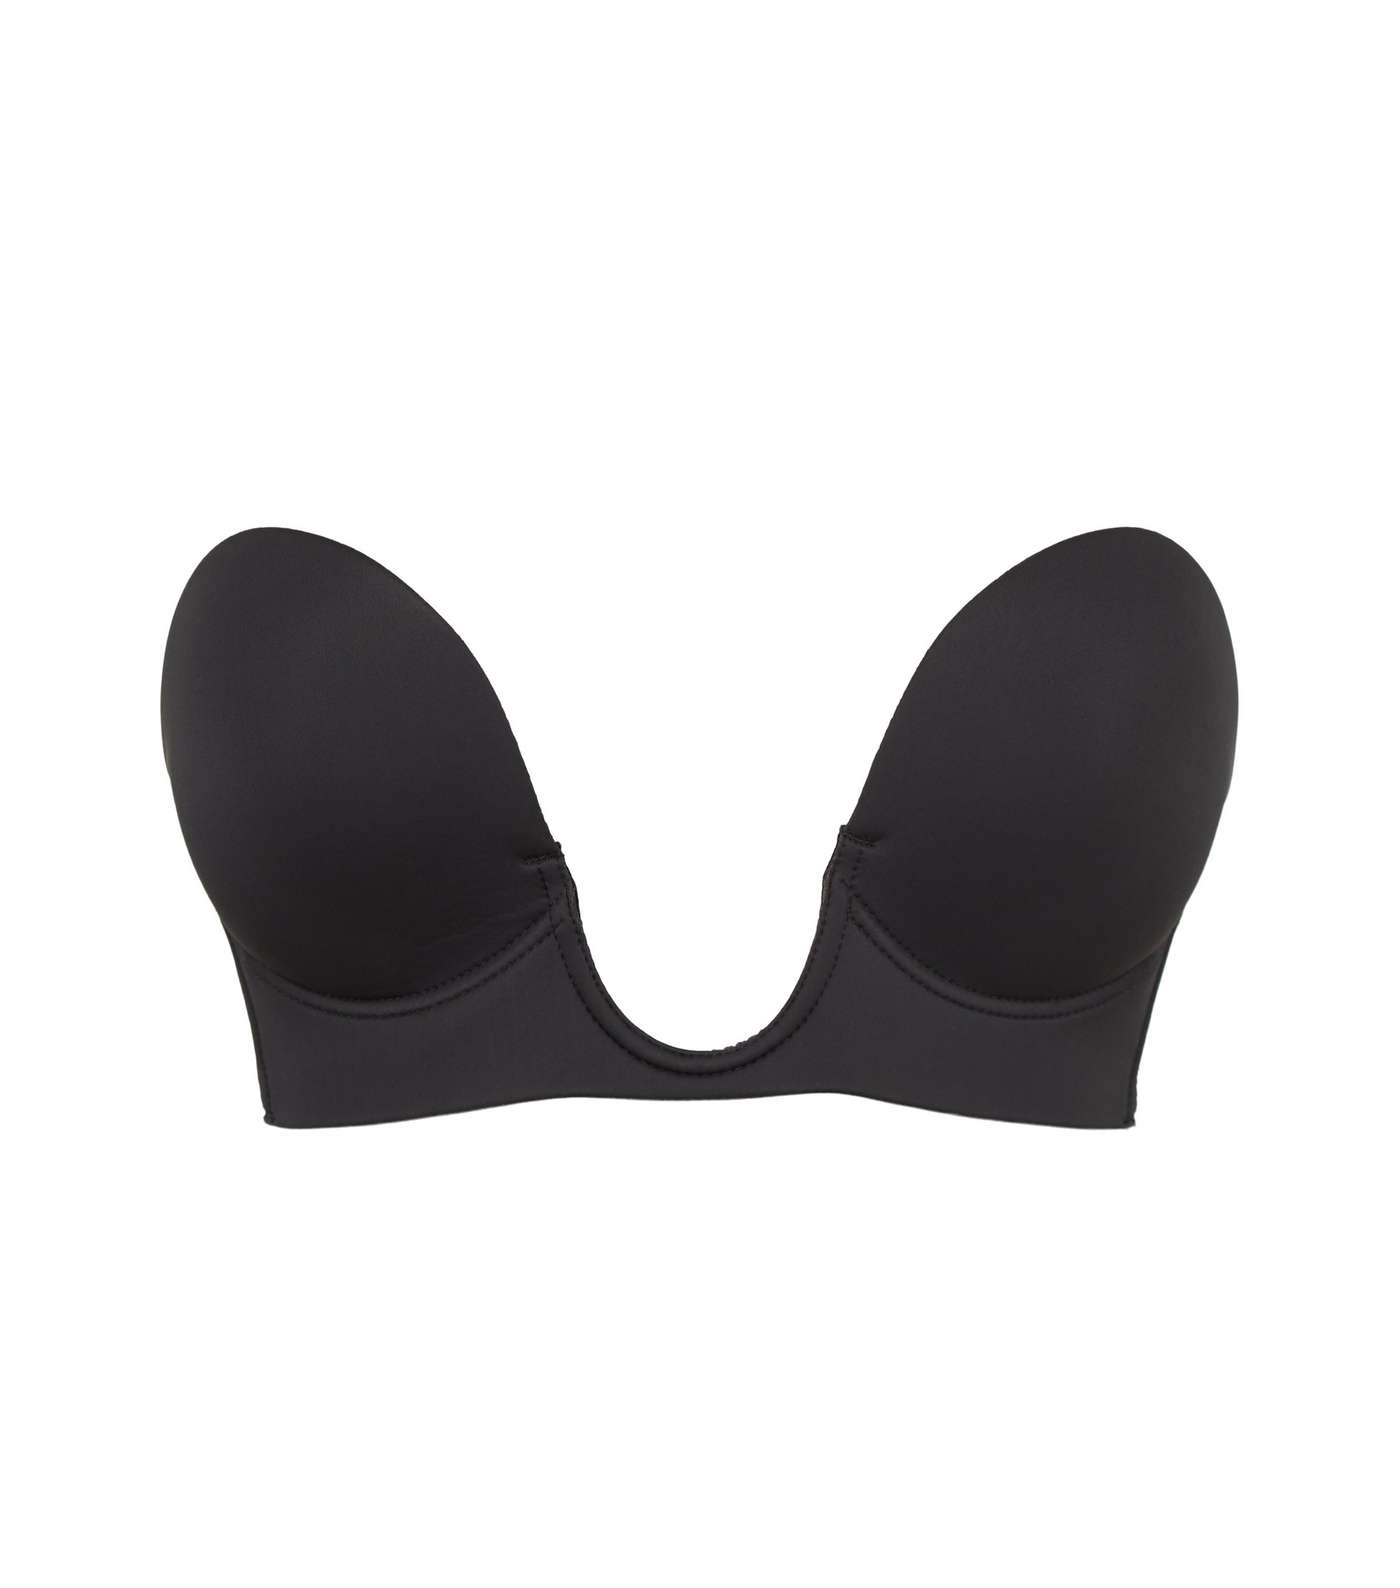 Perfection Beauty Black A Cup Plunge Stick On Bra Image 2